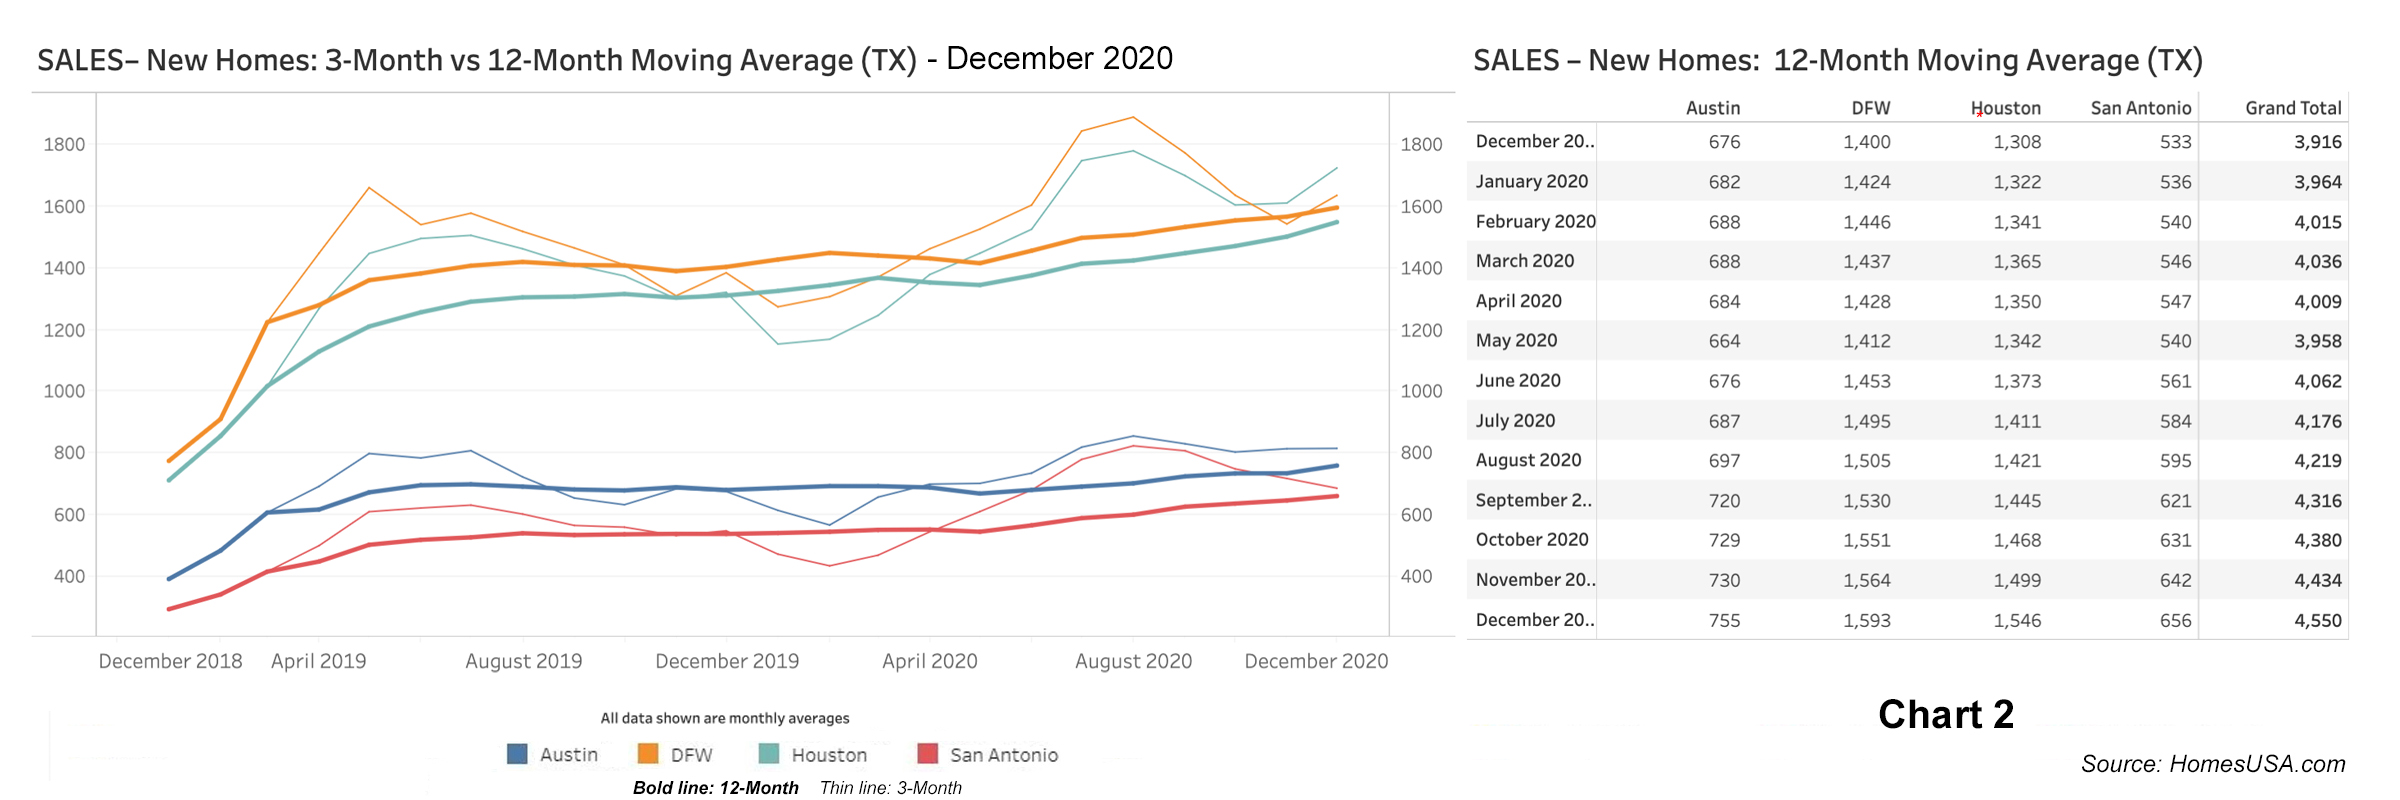 Chart 2: Texas New Home Sales - December 2020